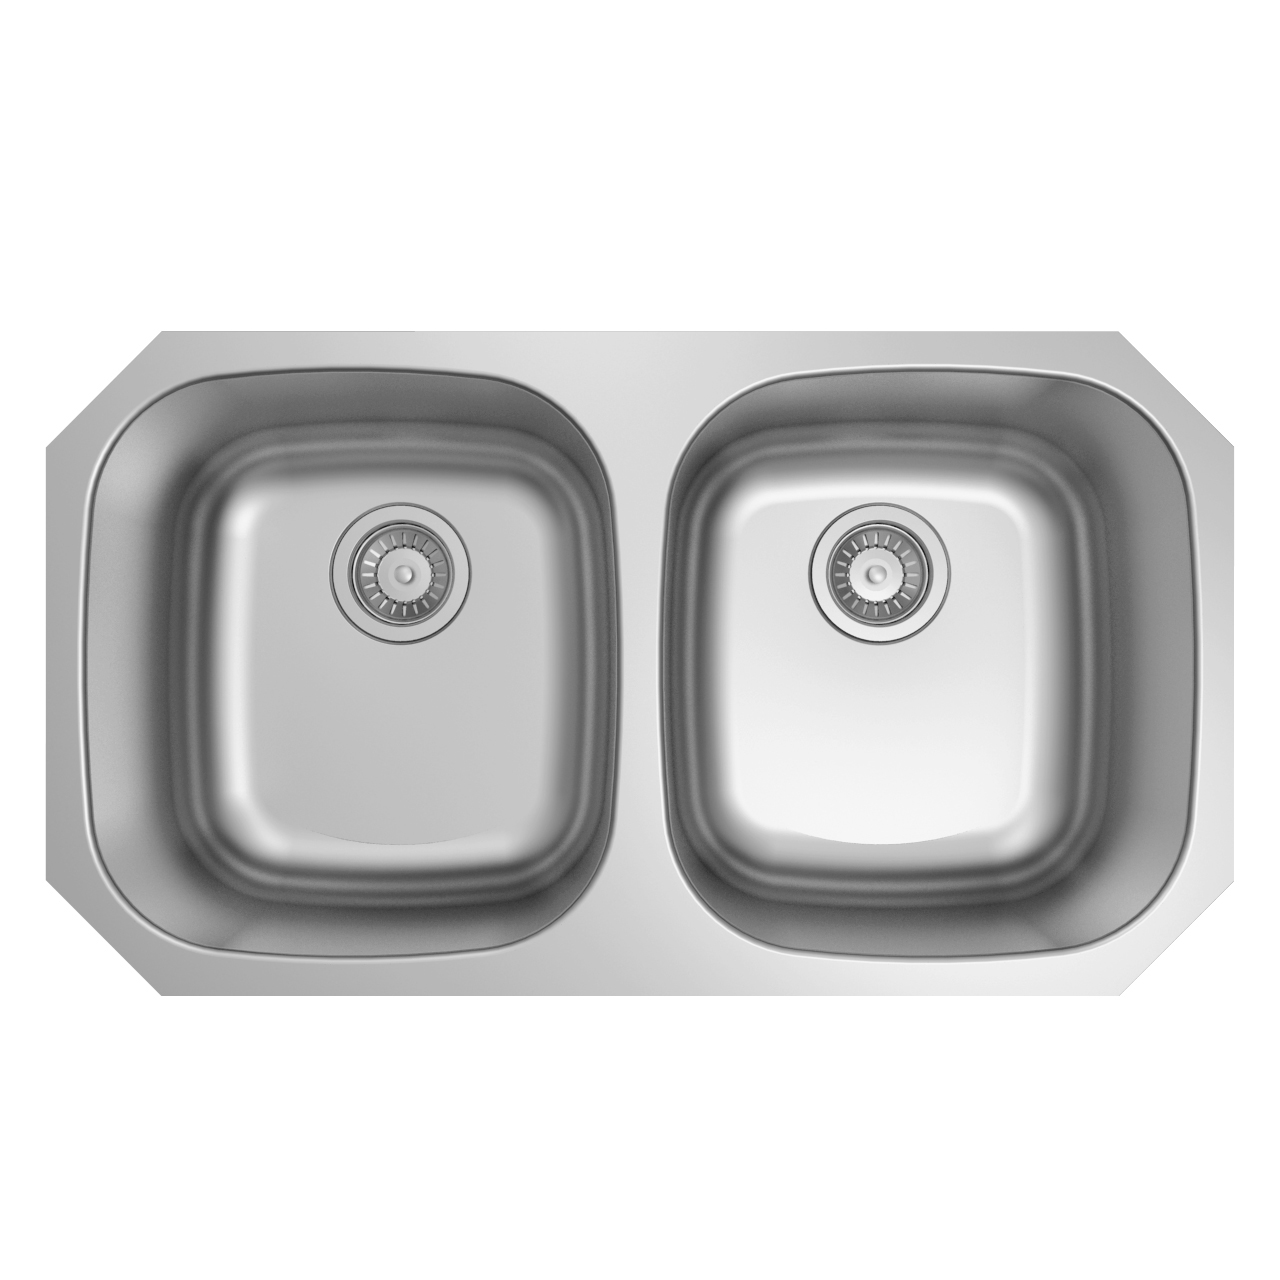 Stainless Steel Double Bowl Pressed Drawn Kitchen Sink